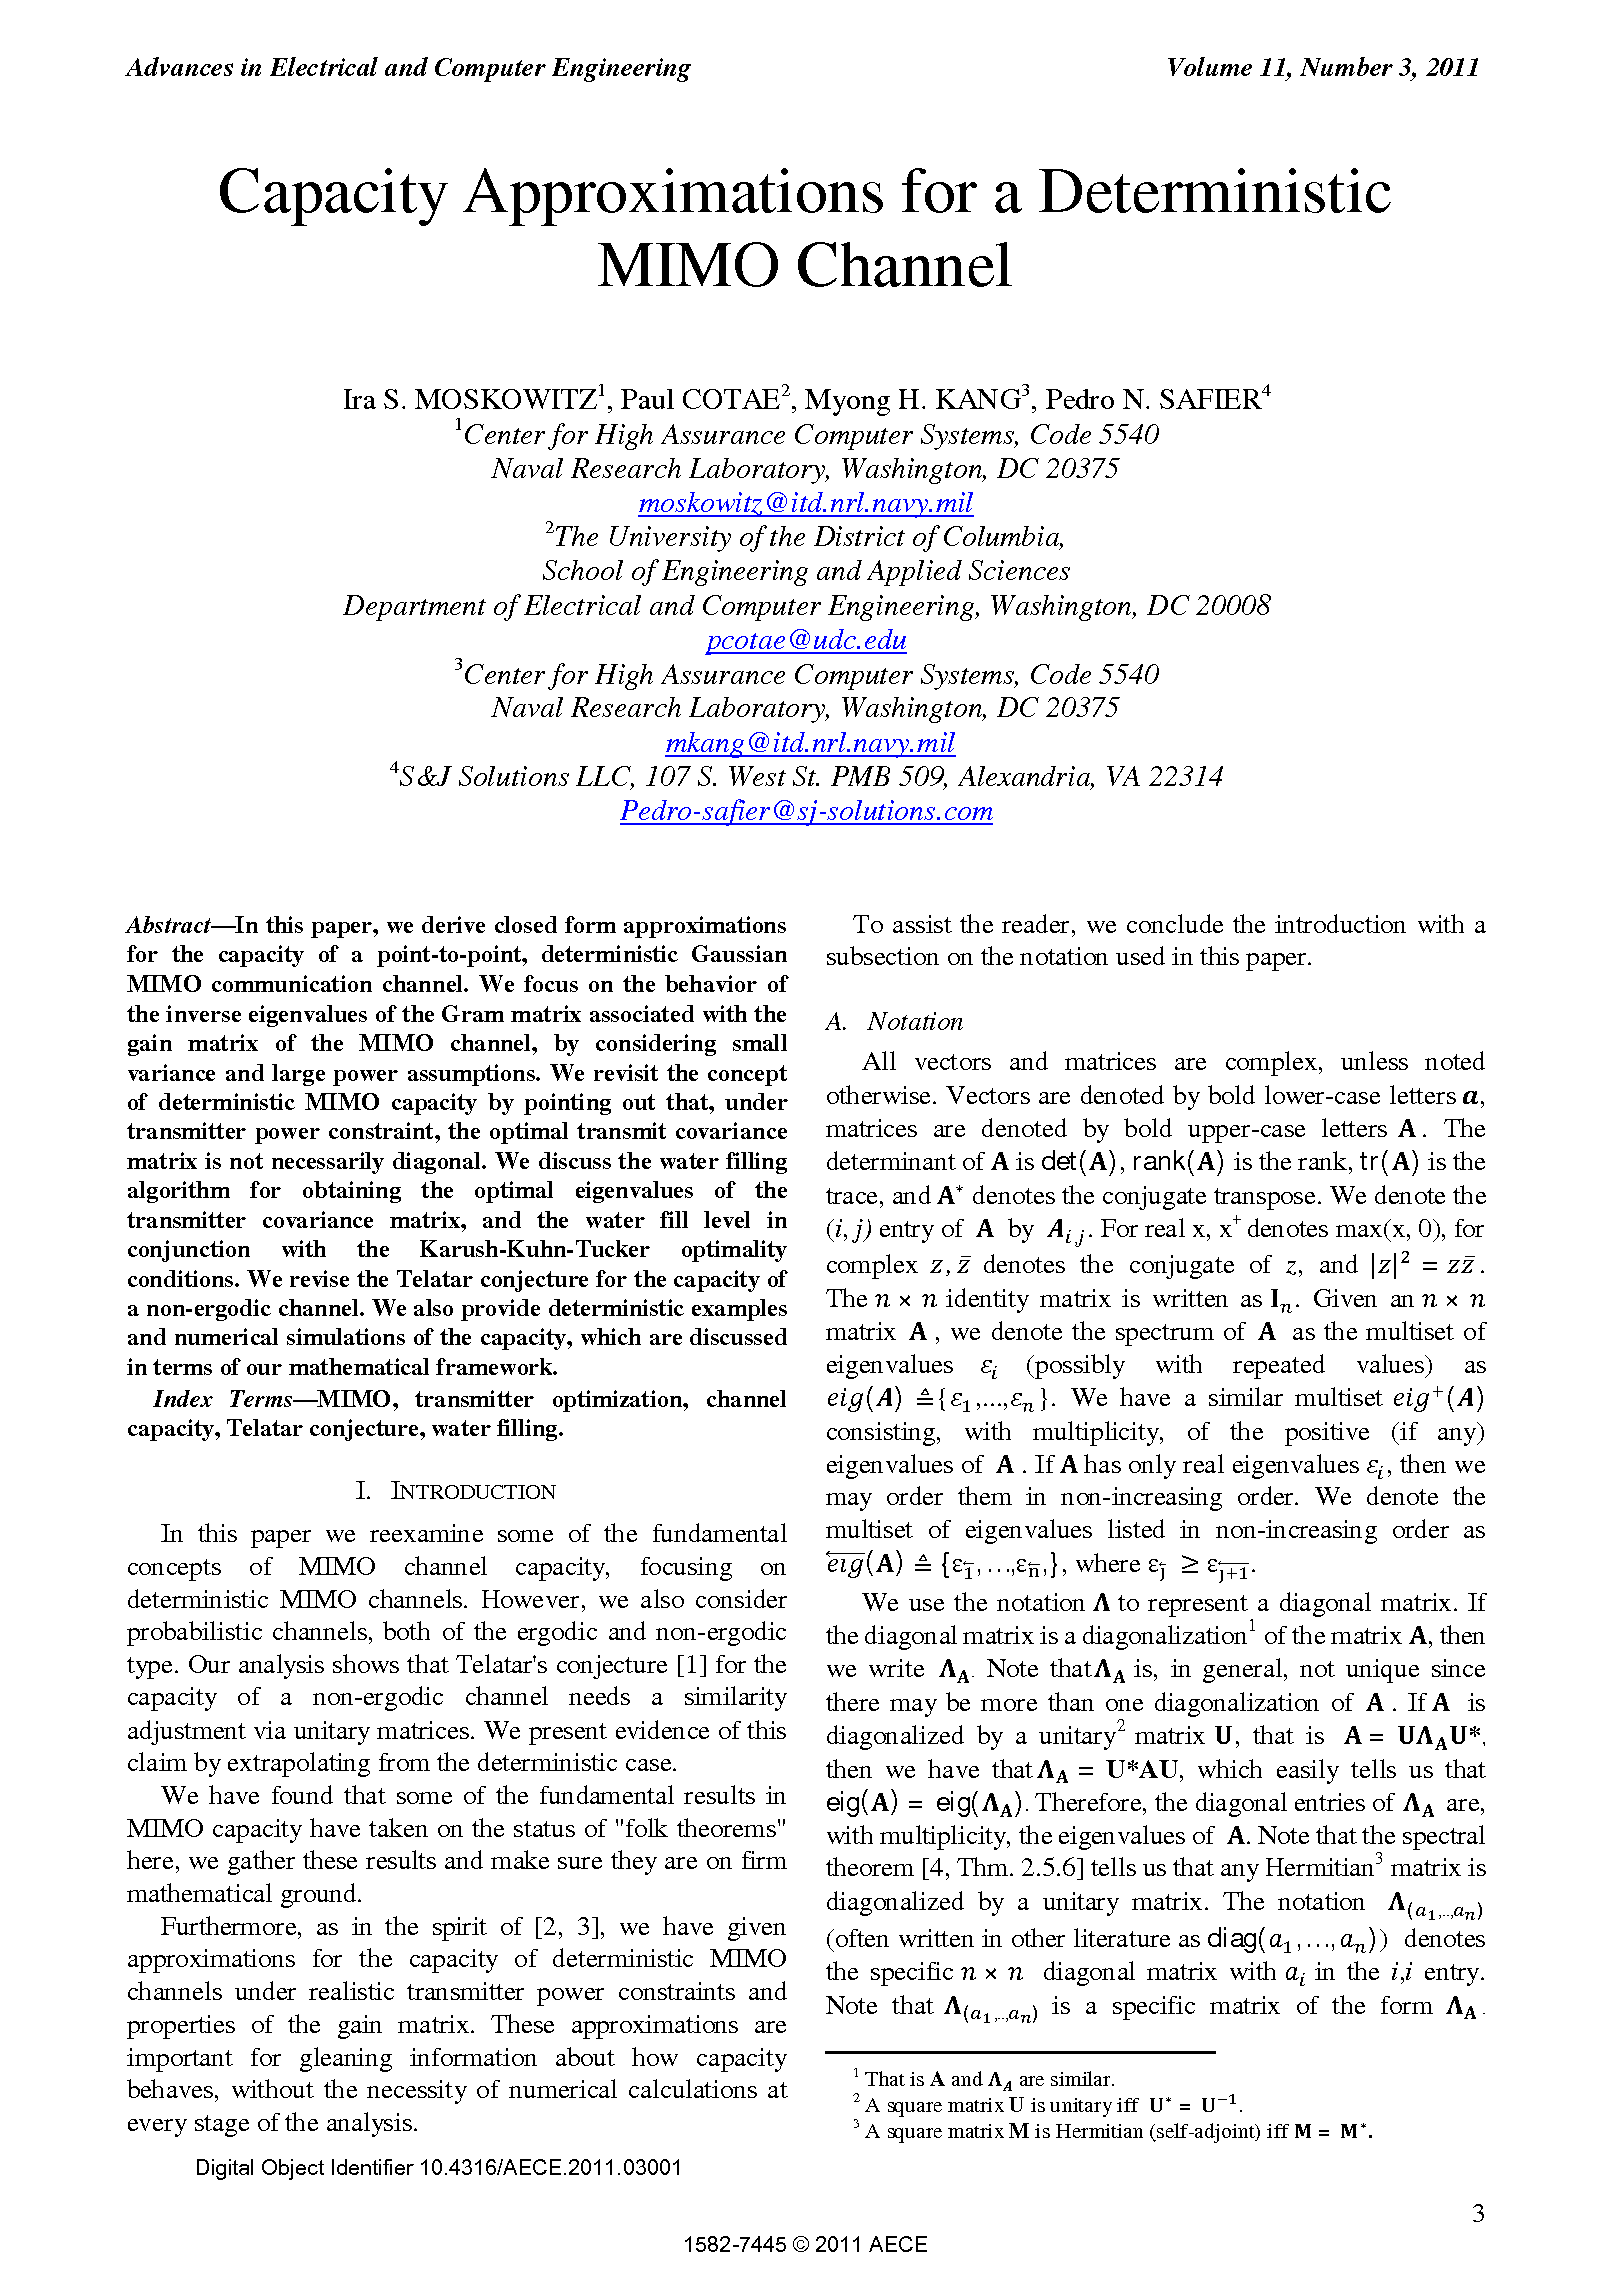 PDF Quickview for paper with DOI:10.4316/AECE.2011.03001